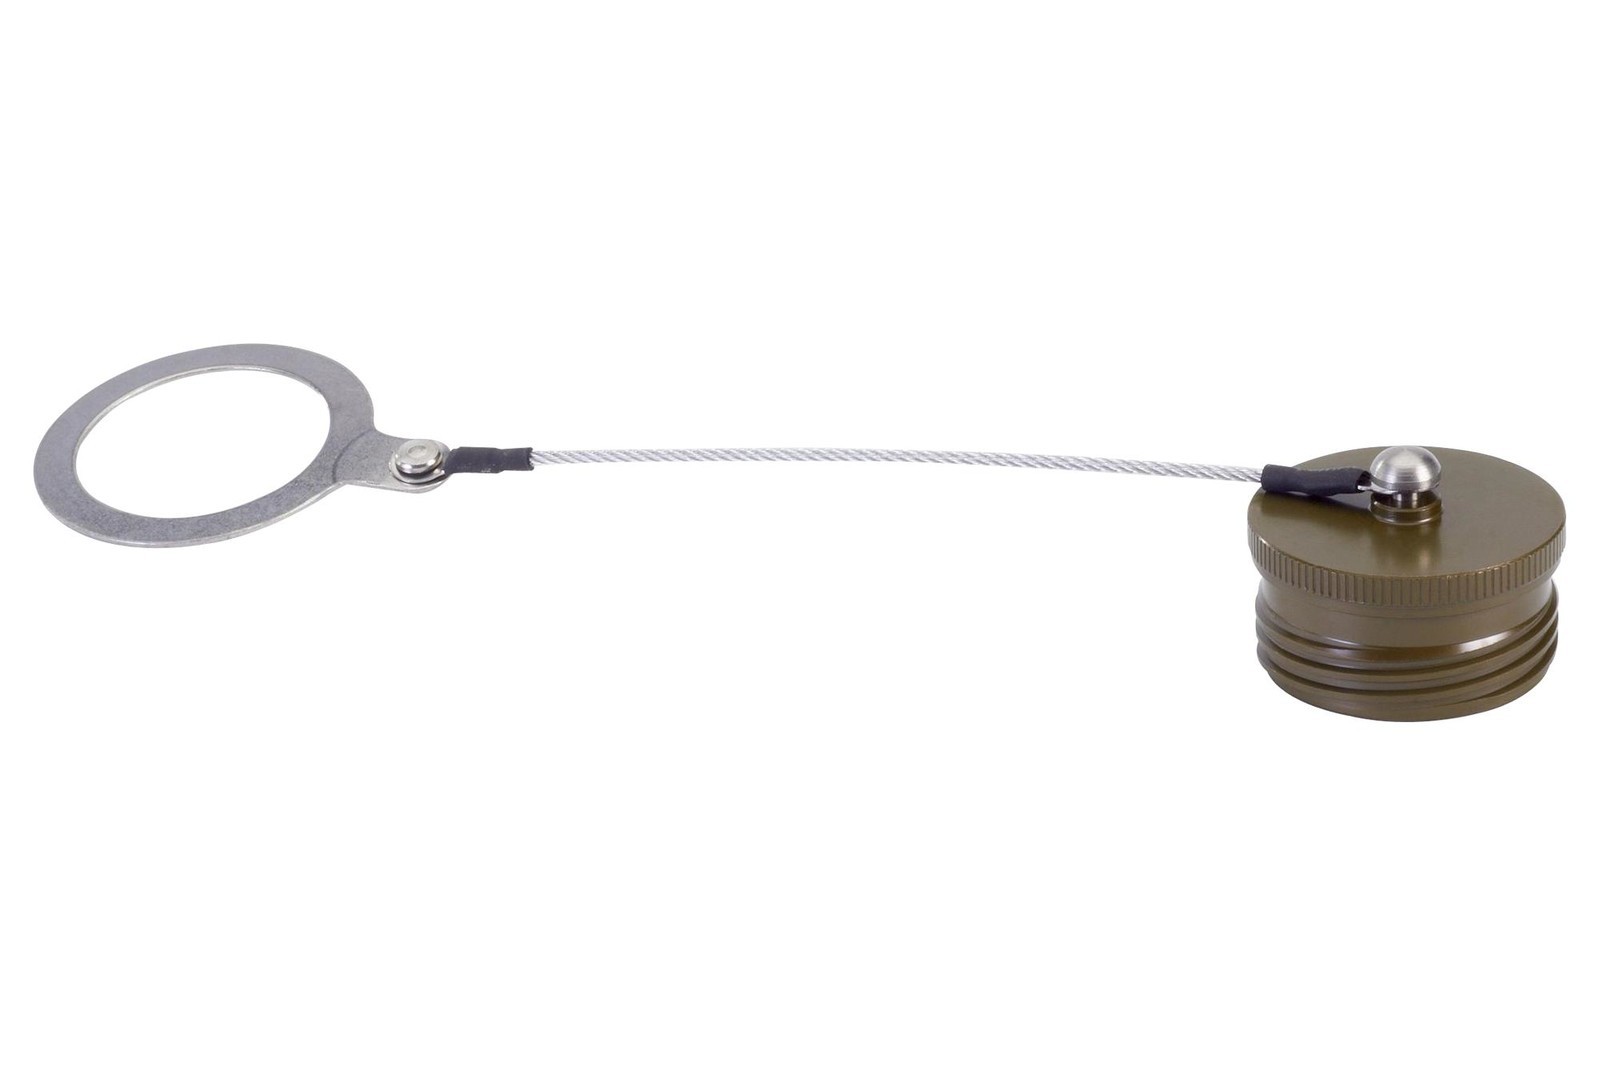 Amphenol Pcd D38999/32W25N Dust Cap W/rope And Ring, Size 25